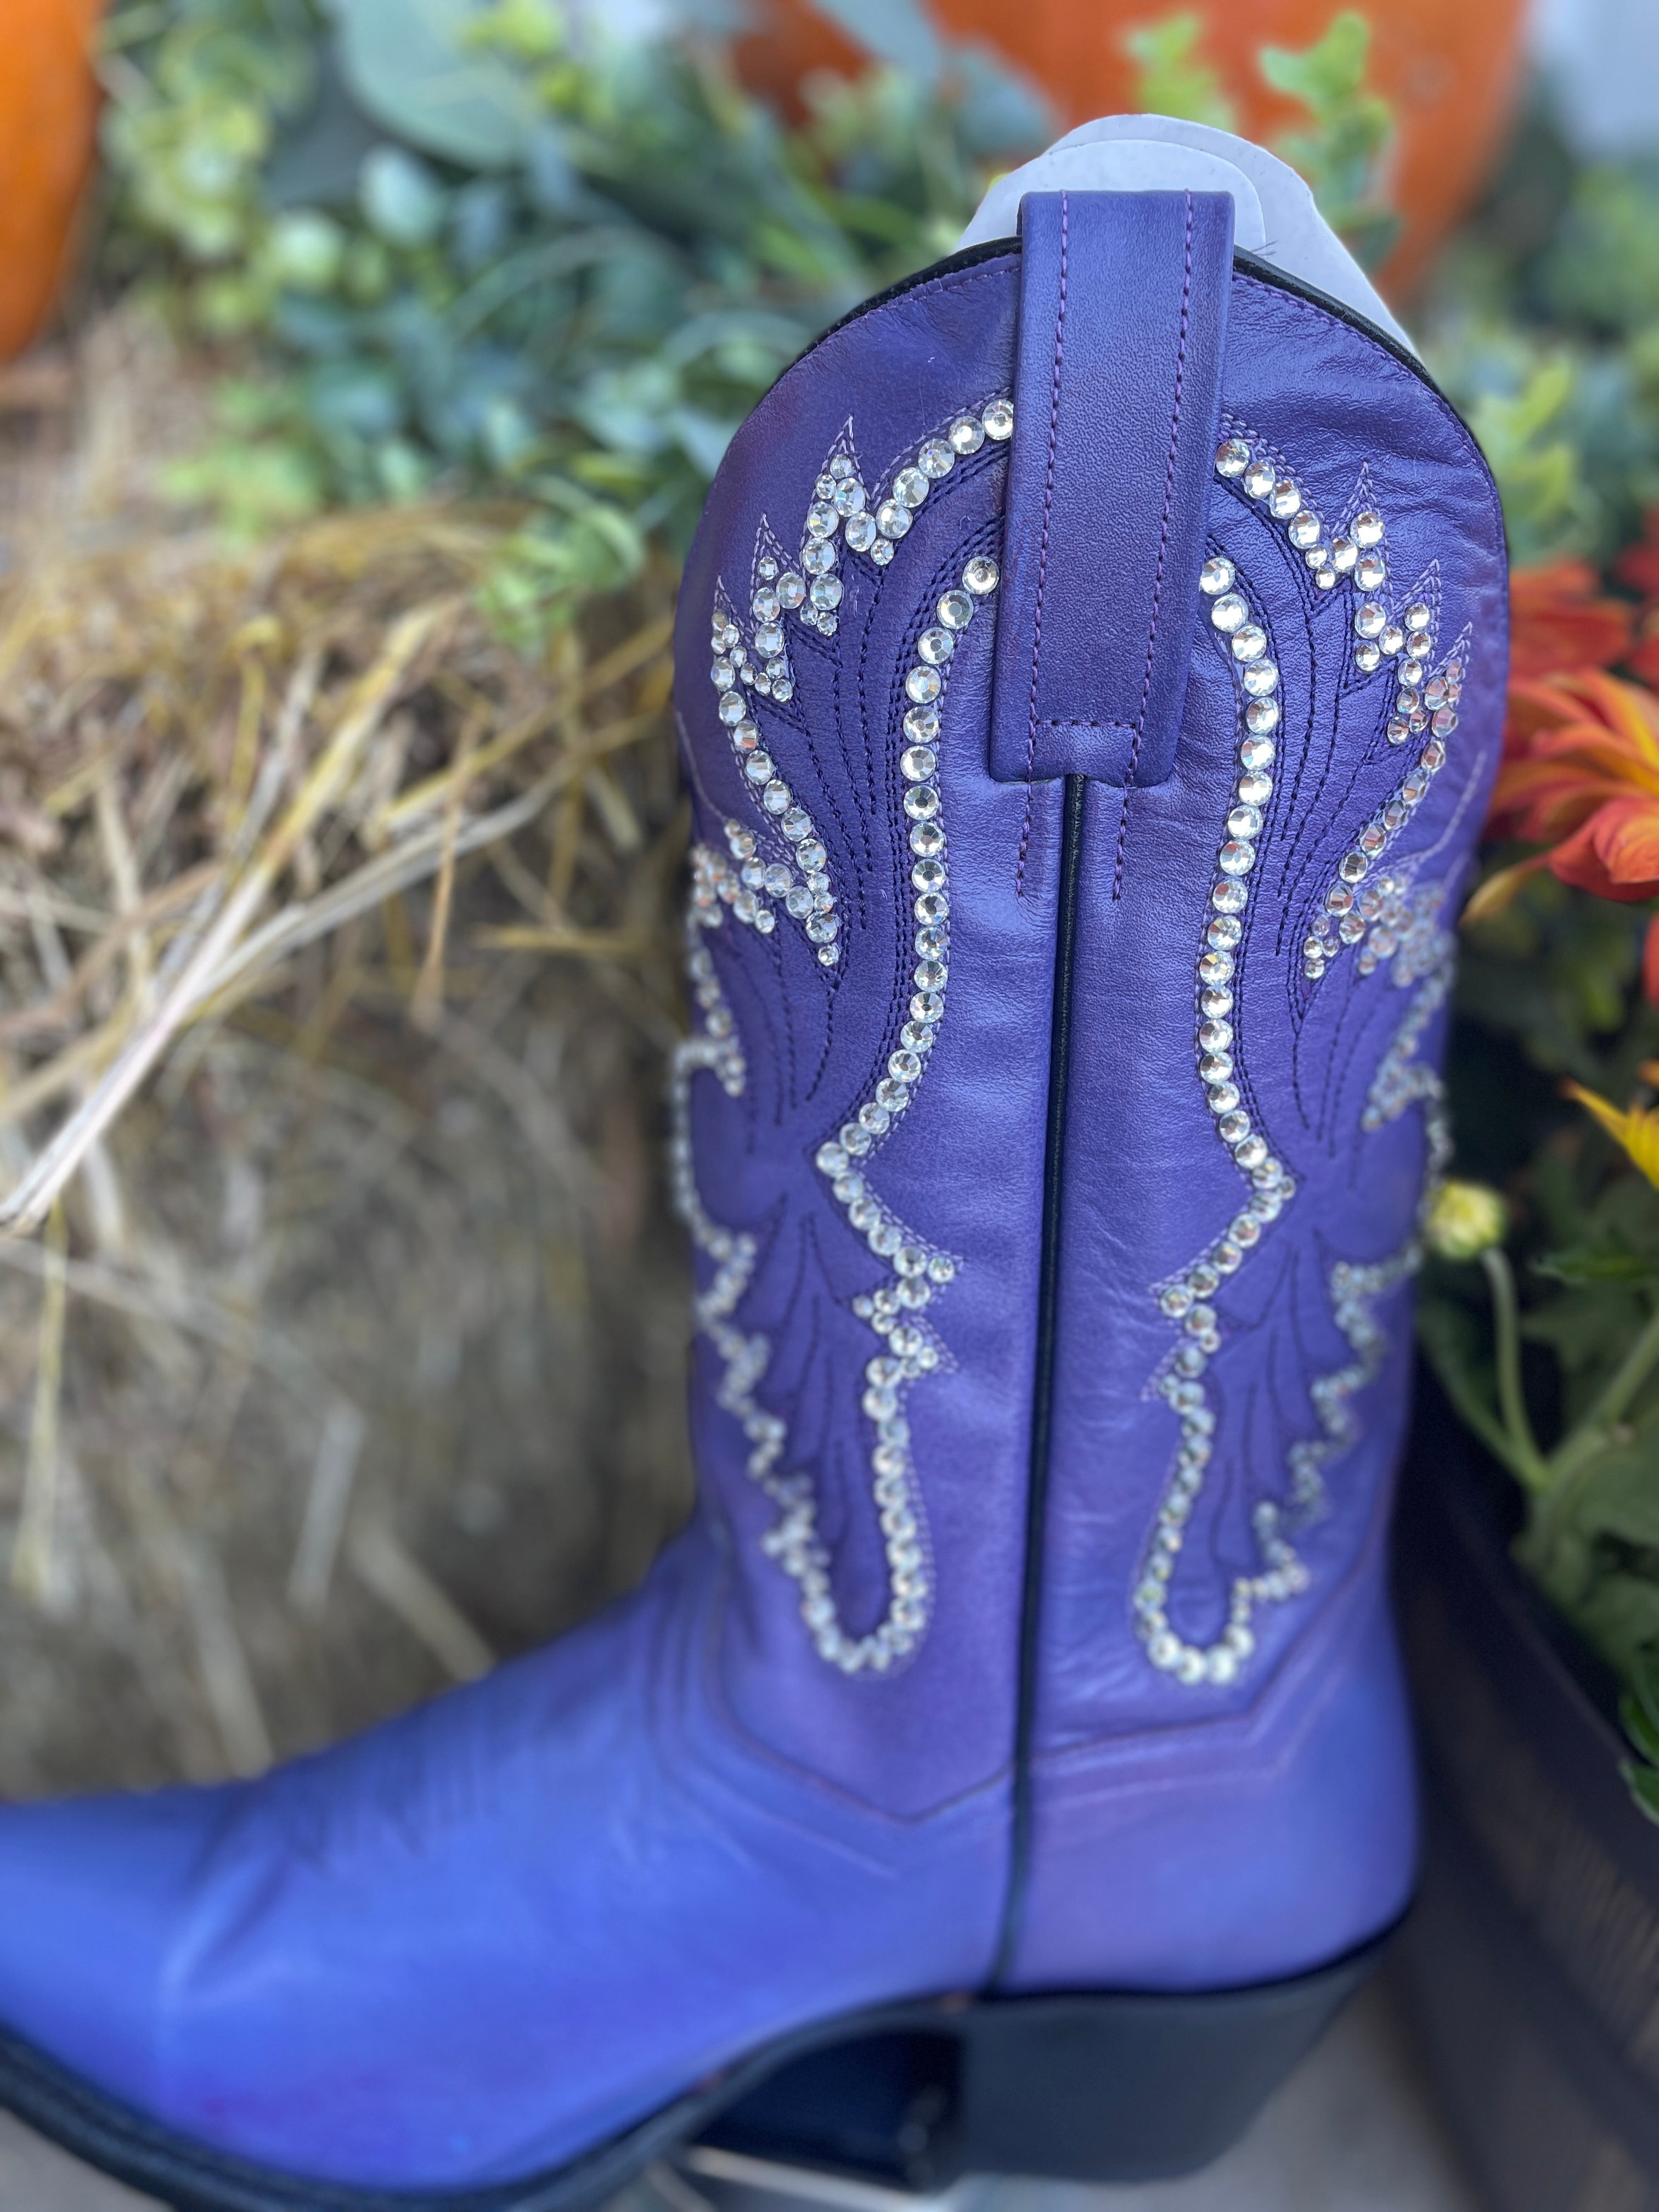 VIOLET - Taupe | Trending shoes, Cowboy boot sandals, Freebird boots